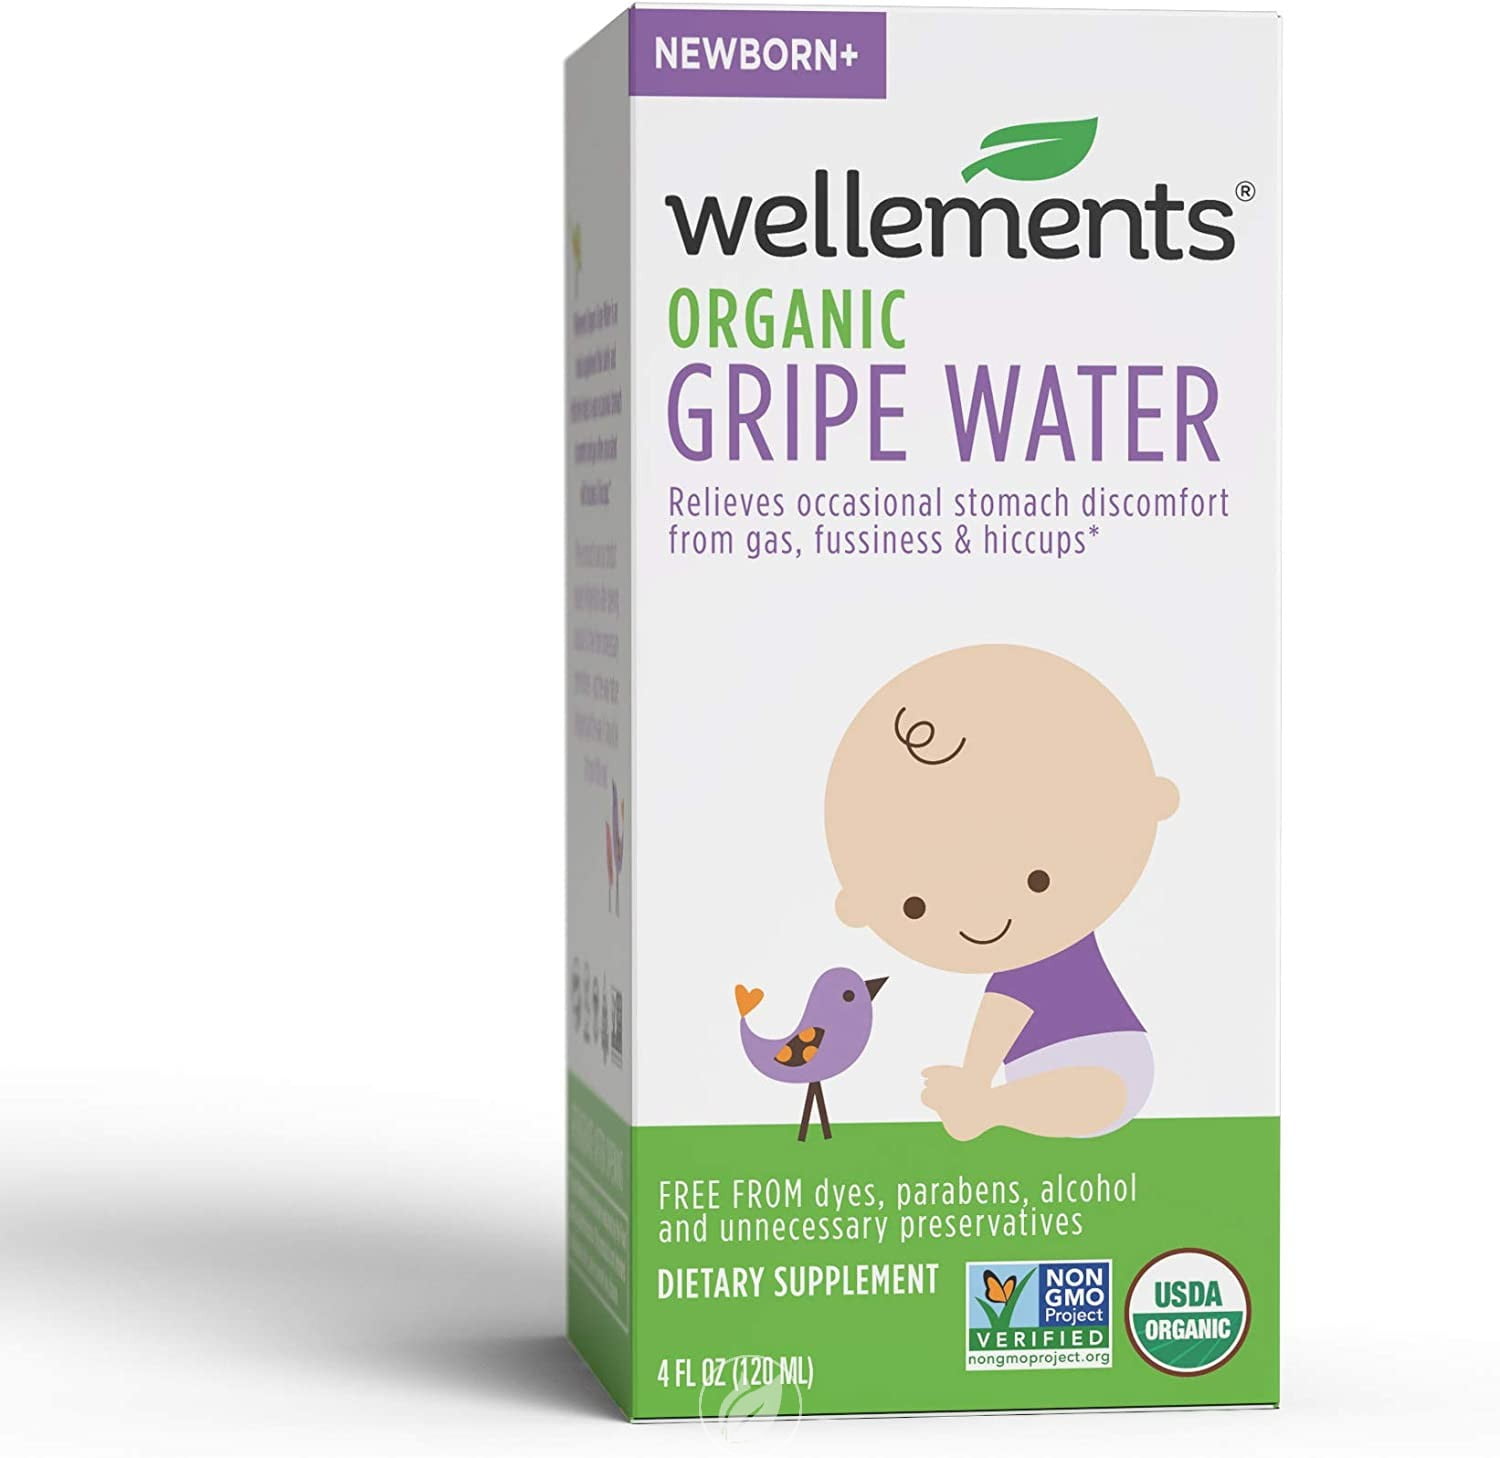 Wellements Organic Gripe Water, 4 Fl Oz, Eases Baby's Stomach Discomfort  and Gas, Free From Dyes, Parabens, Preservatives 